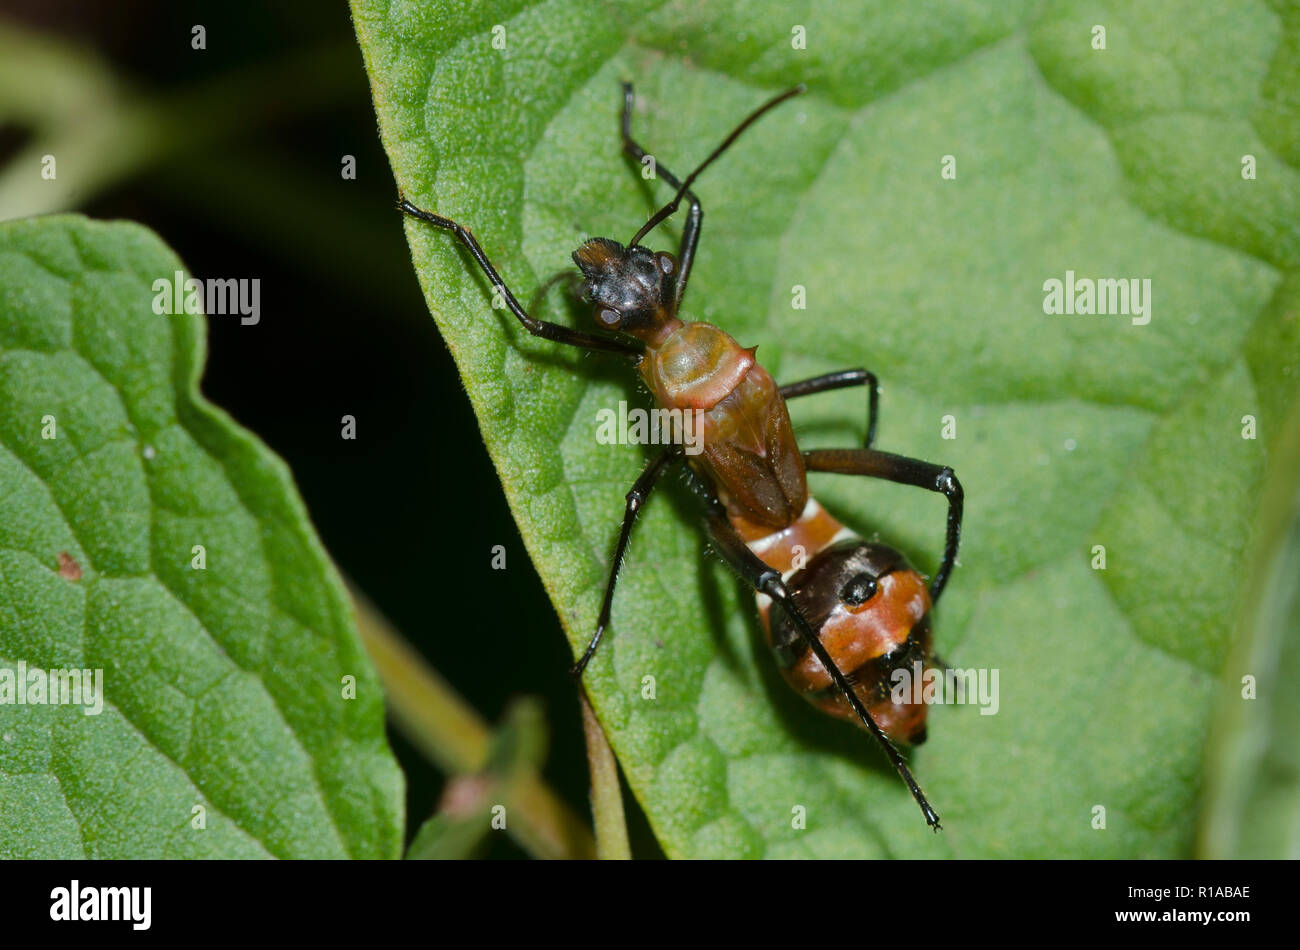 Broad-headed Bug, Family Alydidae, nymph, an ant mimic Stock Photo